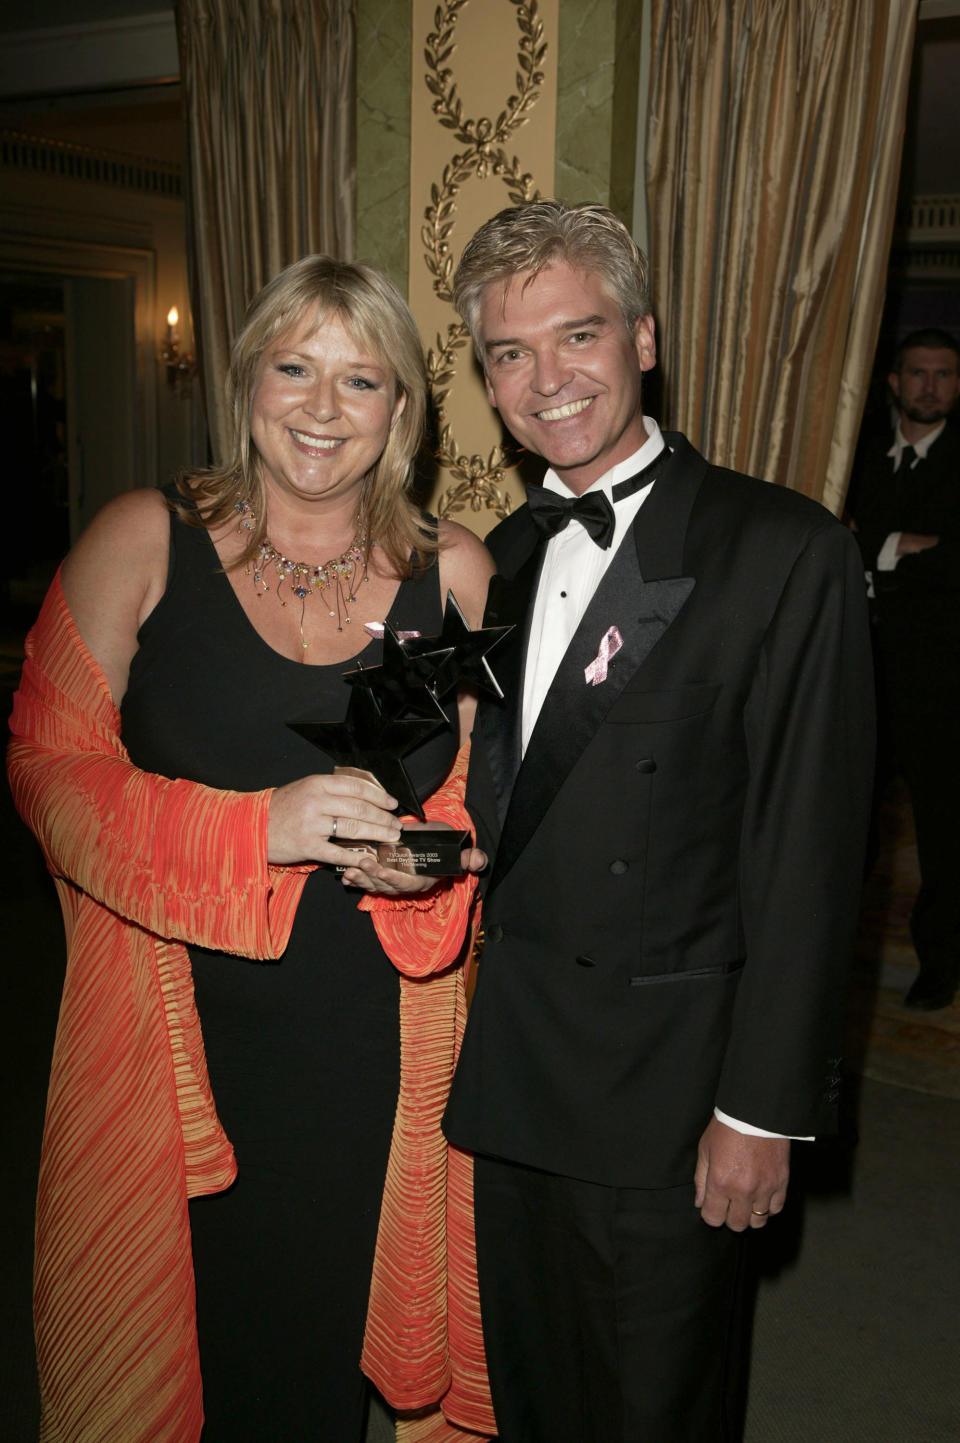 Phillip Schofield and Fern Britton with award for 